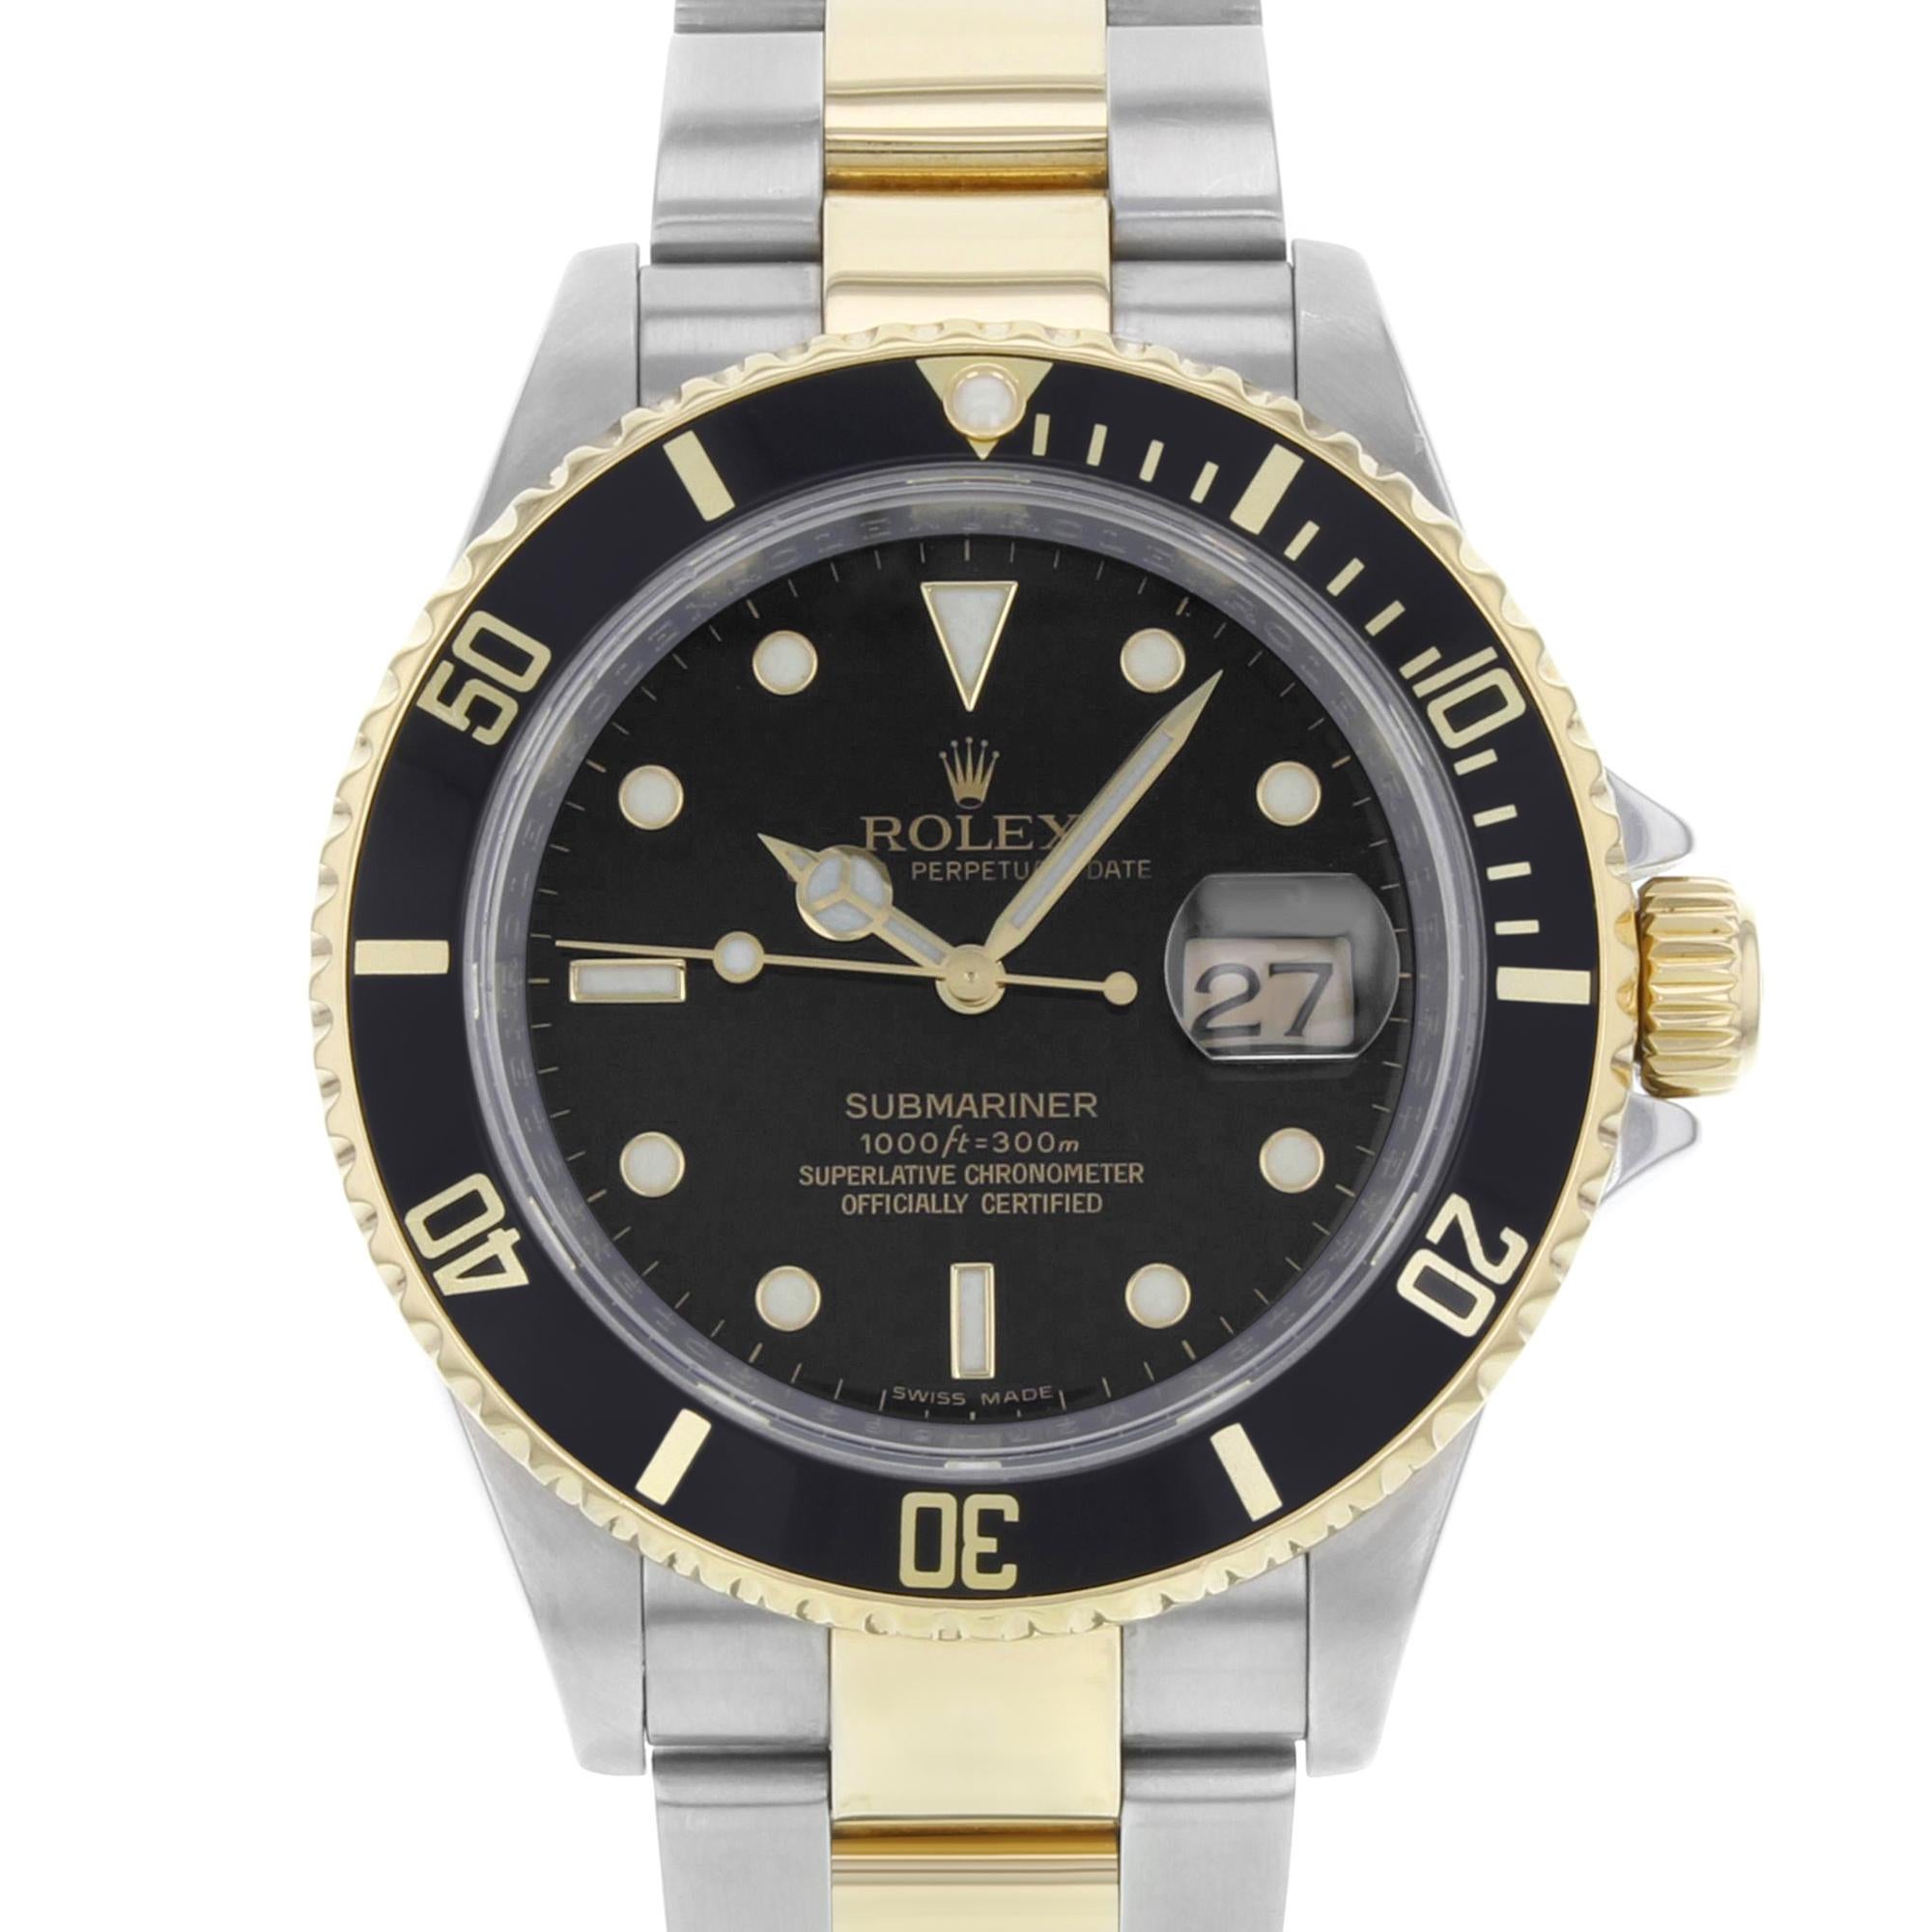 Rolex Submariner 16613 T 2004 No Holes 4-Liner Gold Clasp Date Automatic Watch